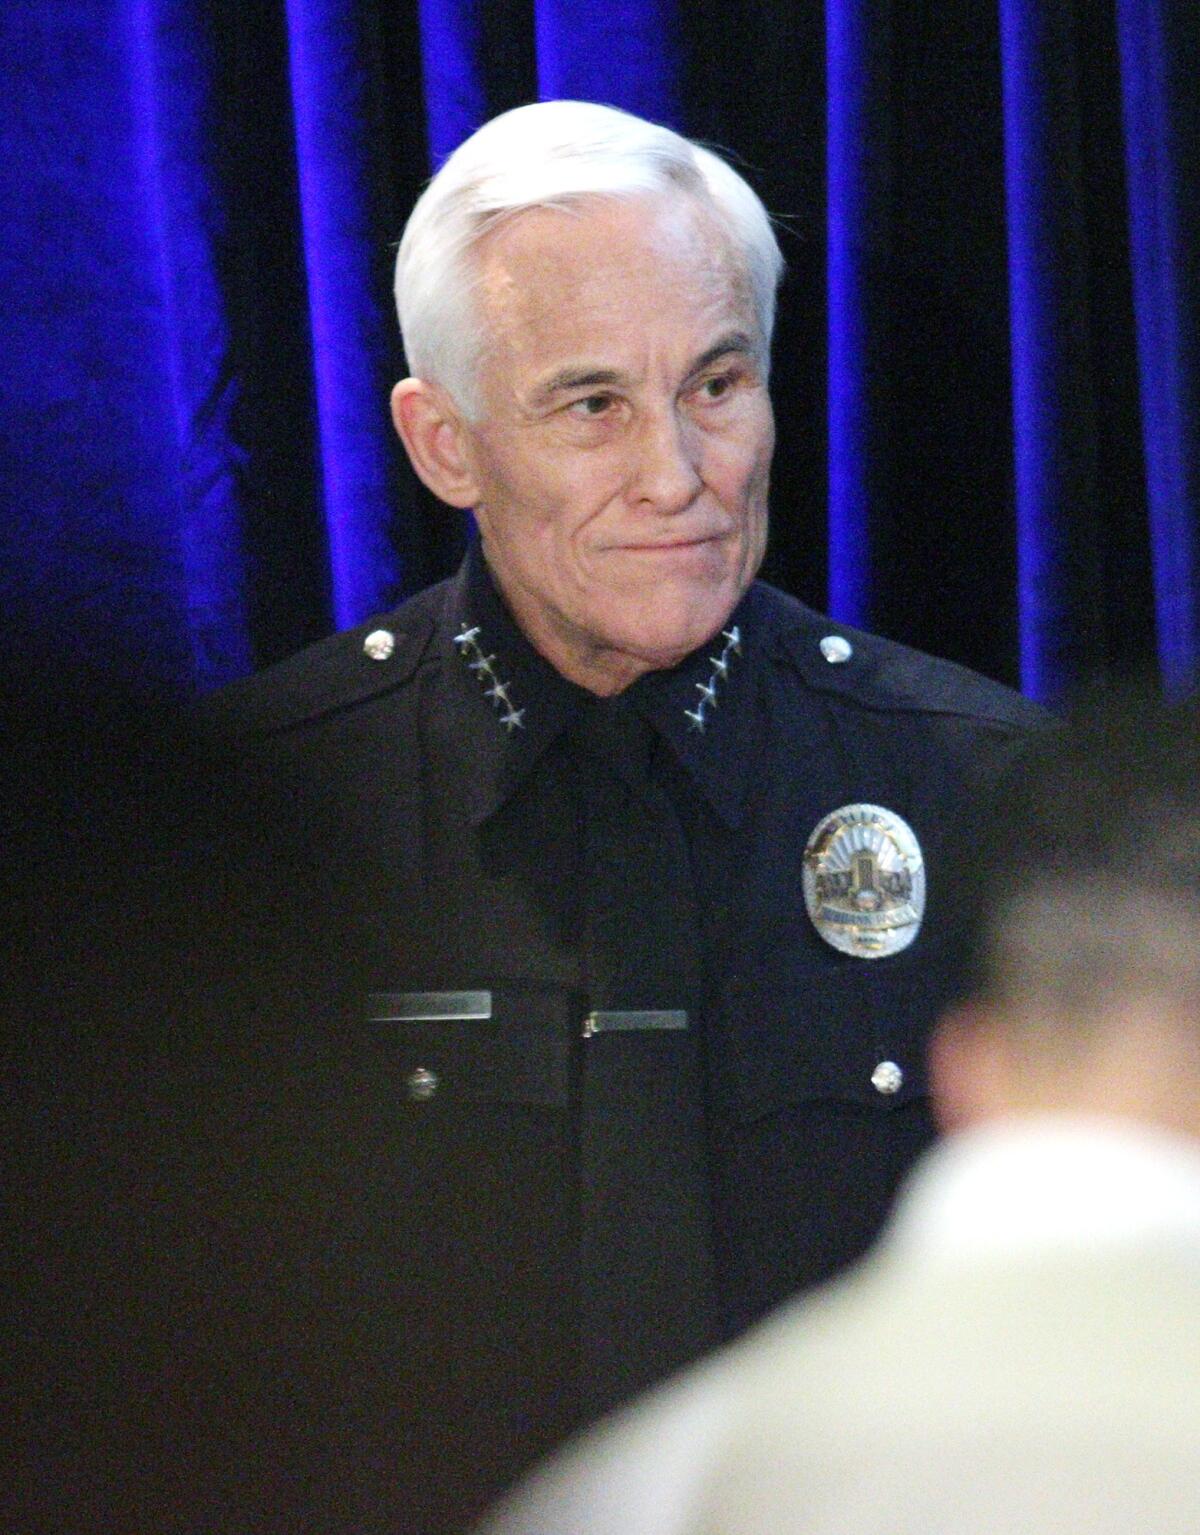 Police departments throughout the Southland have struggled to fill their ranks. "We're all experiencing a dearth of qualified candidates," said Burbank Police Chief Scott LaChasse, picture.